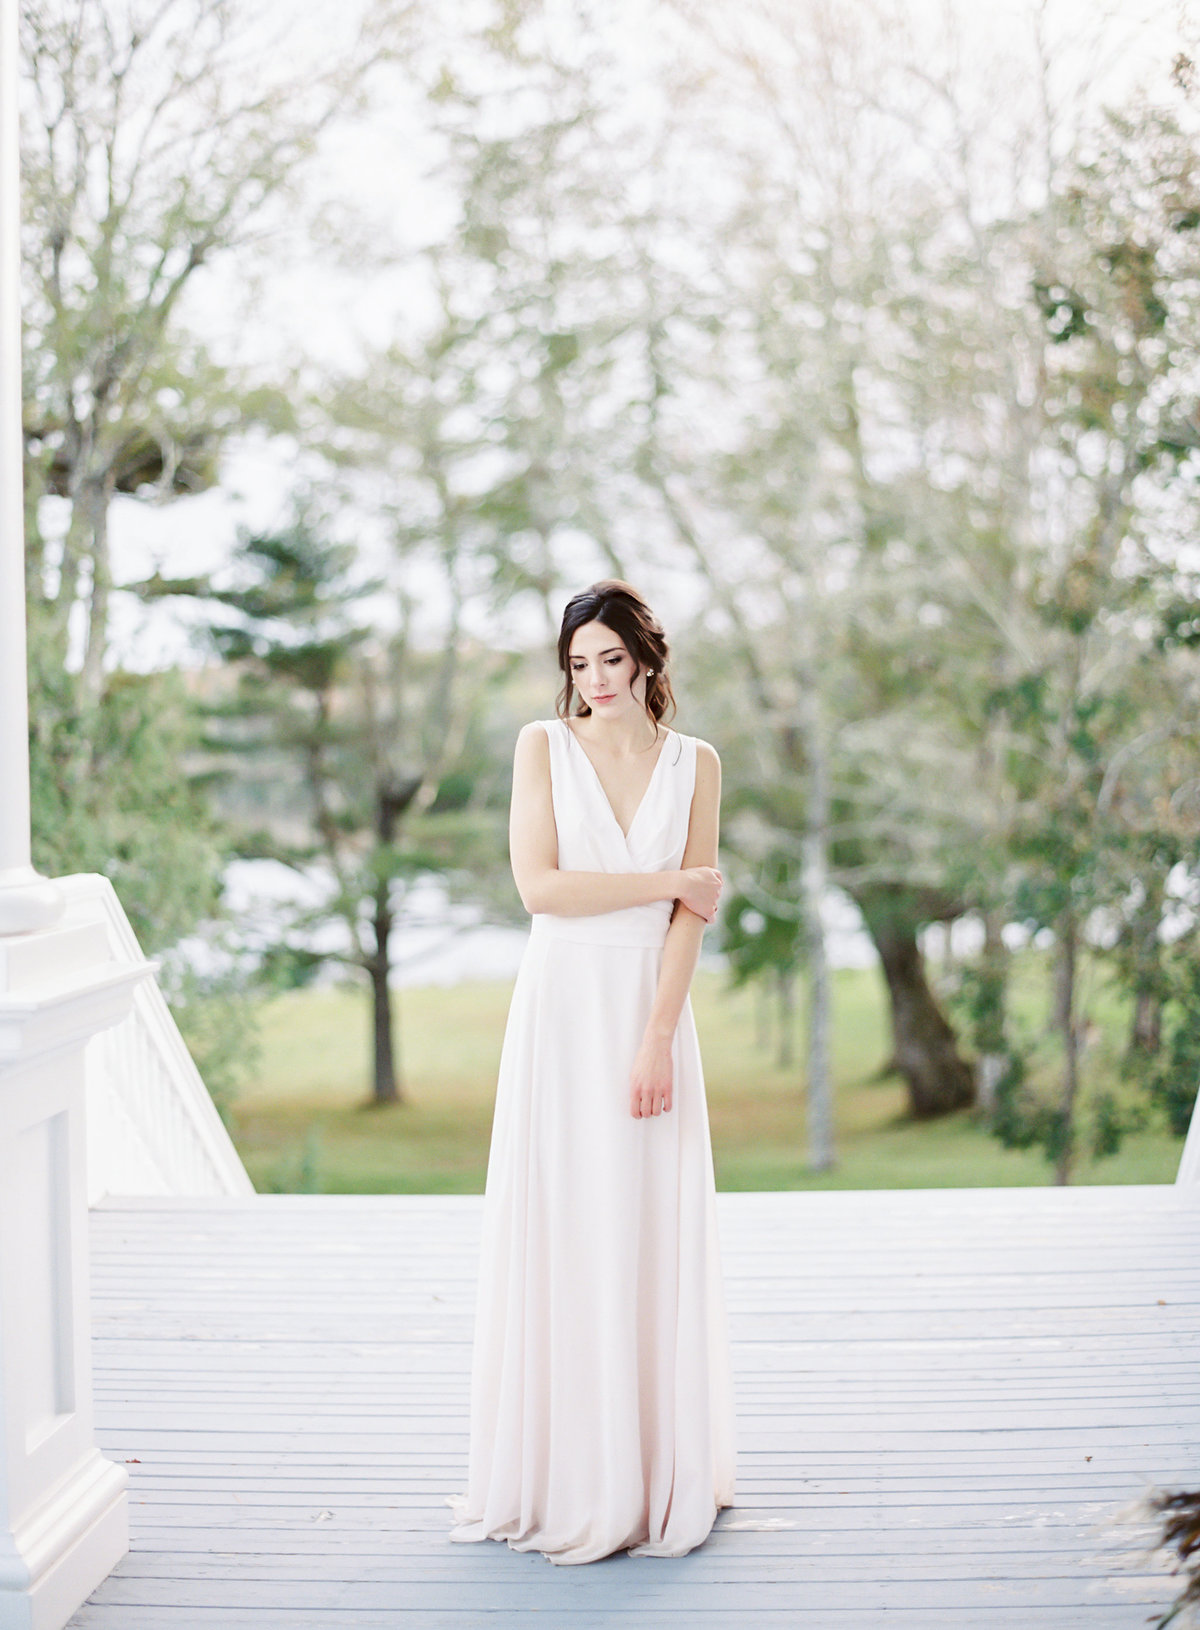 Jacqueline Anne Photography - Mount Uniacke Editorial-50